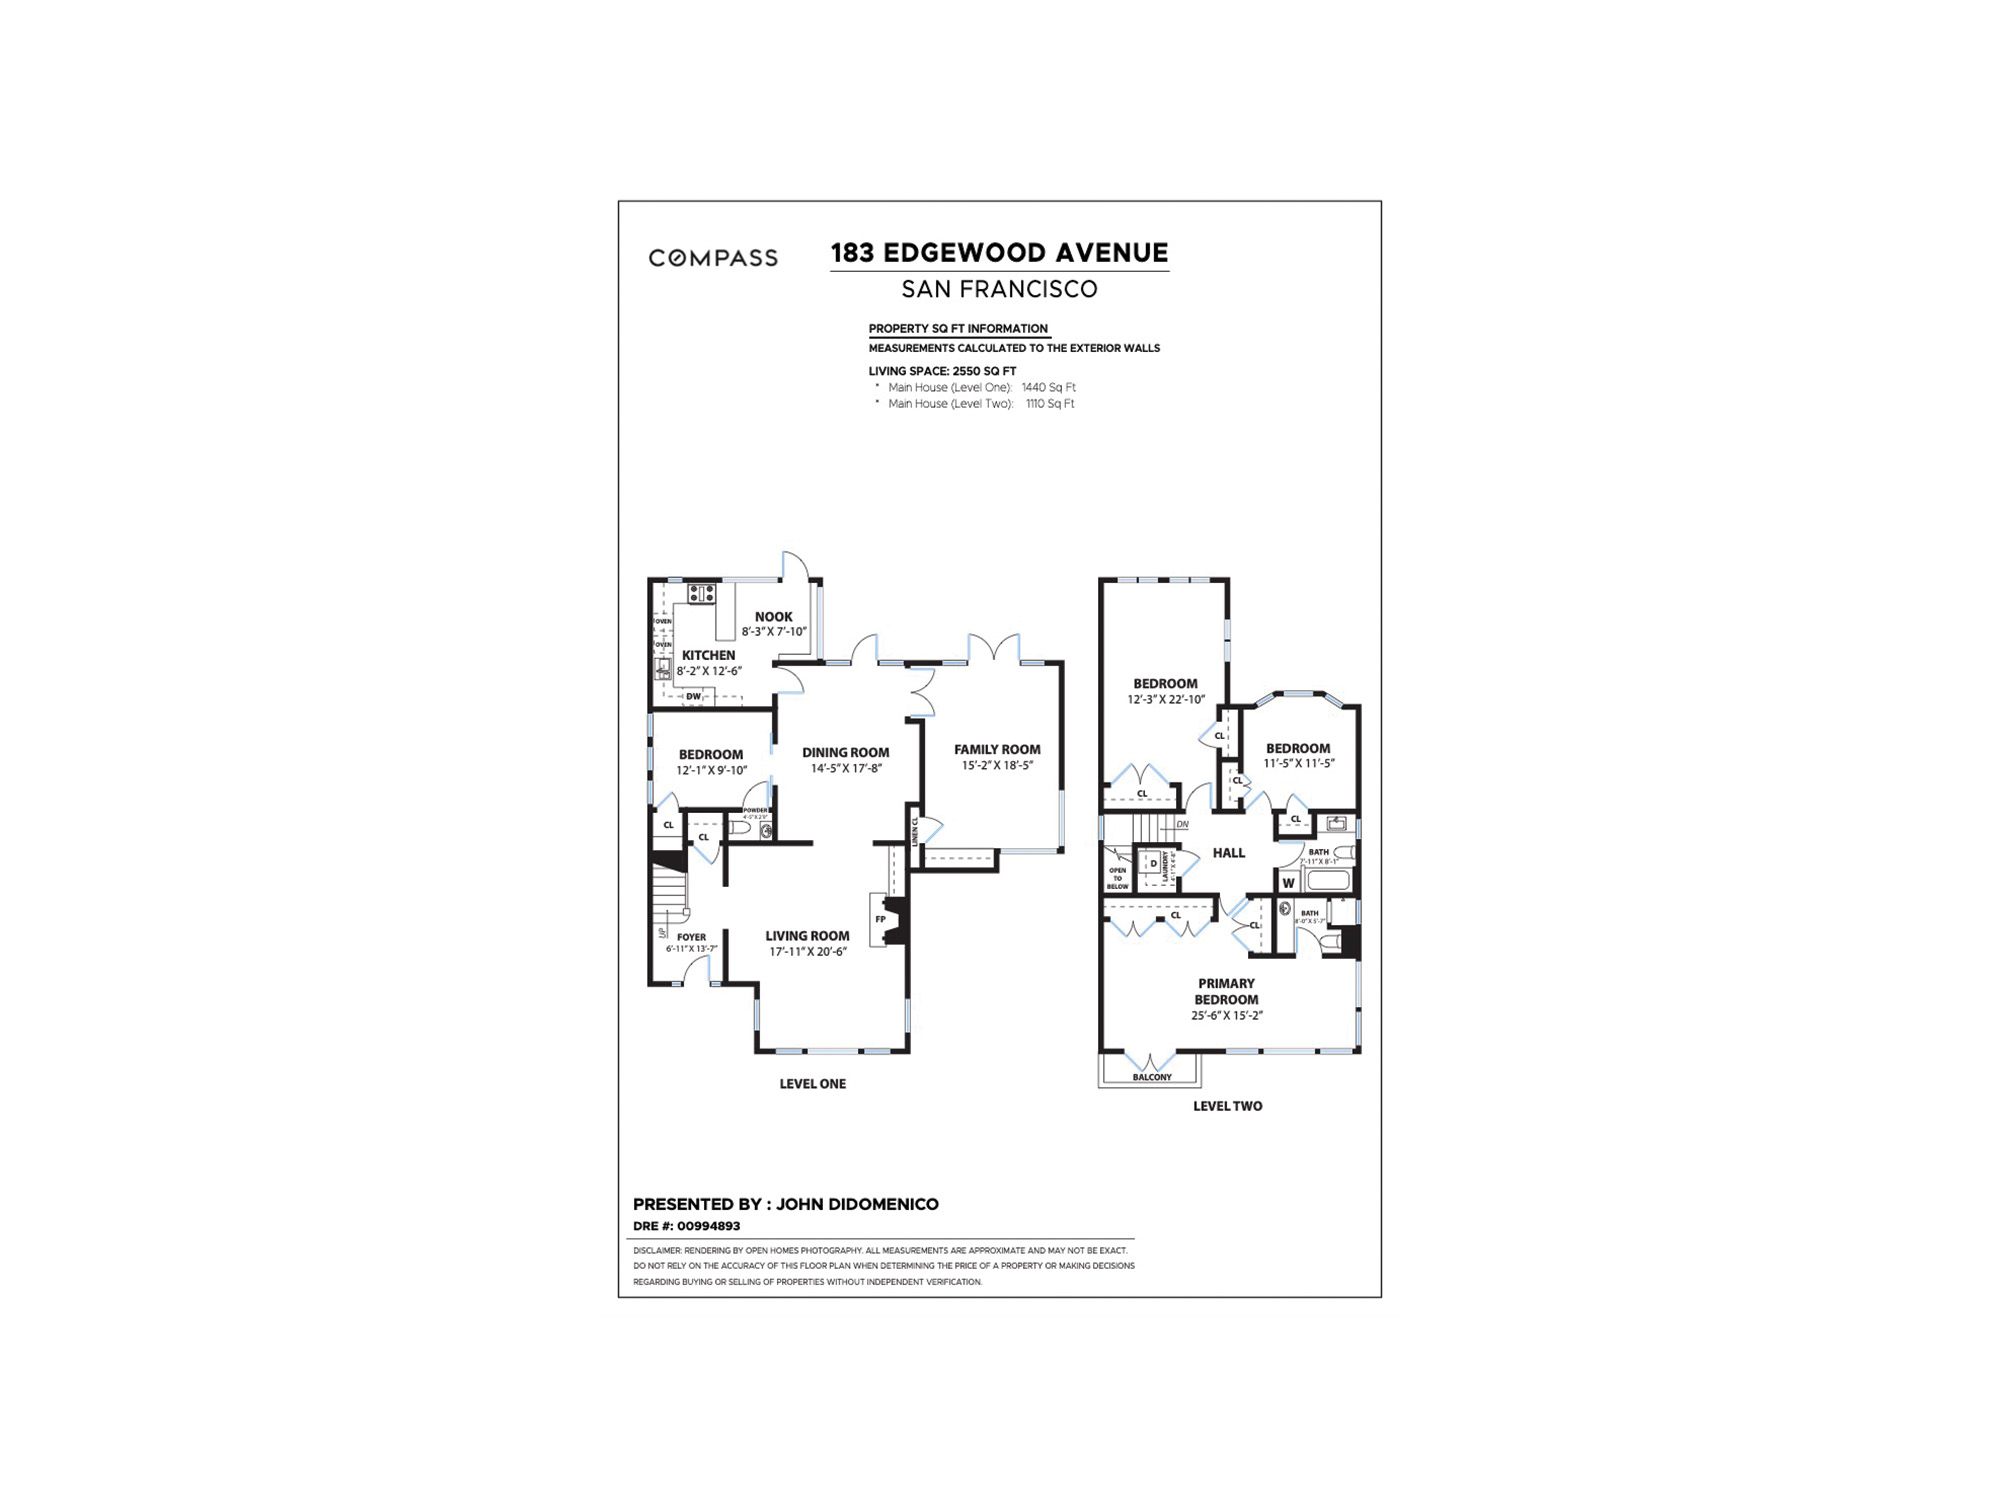 Property Photo: Print of the floor plan for 183 Edgewood Avenue